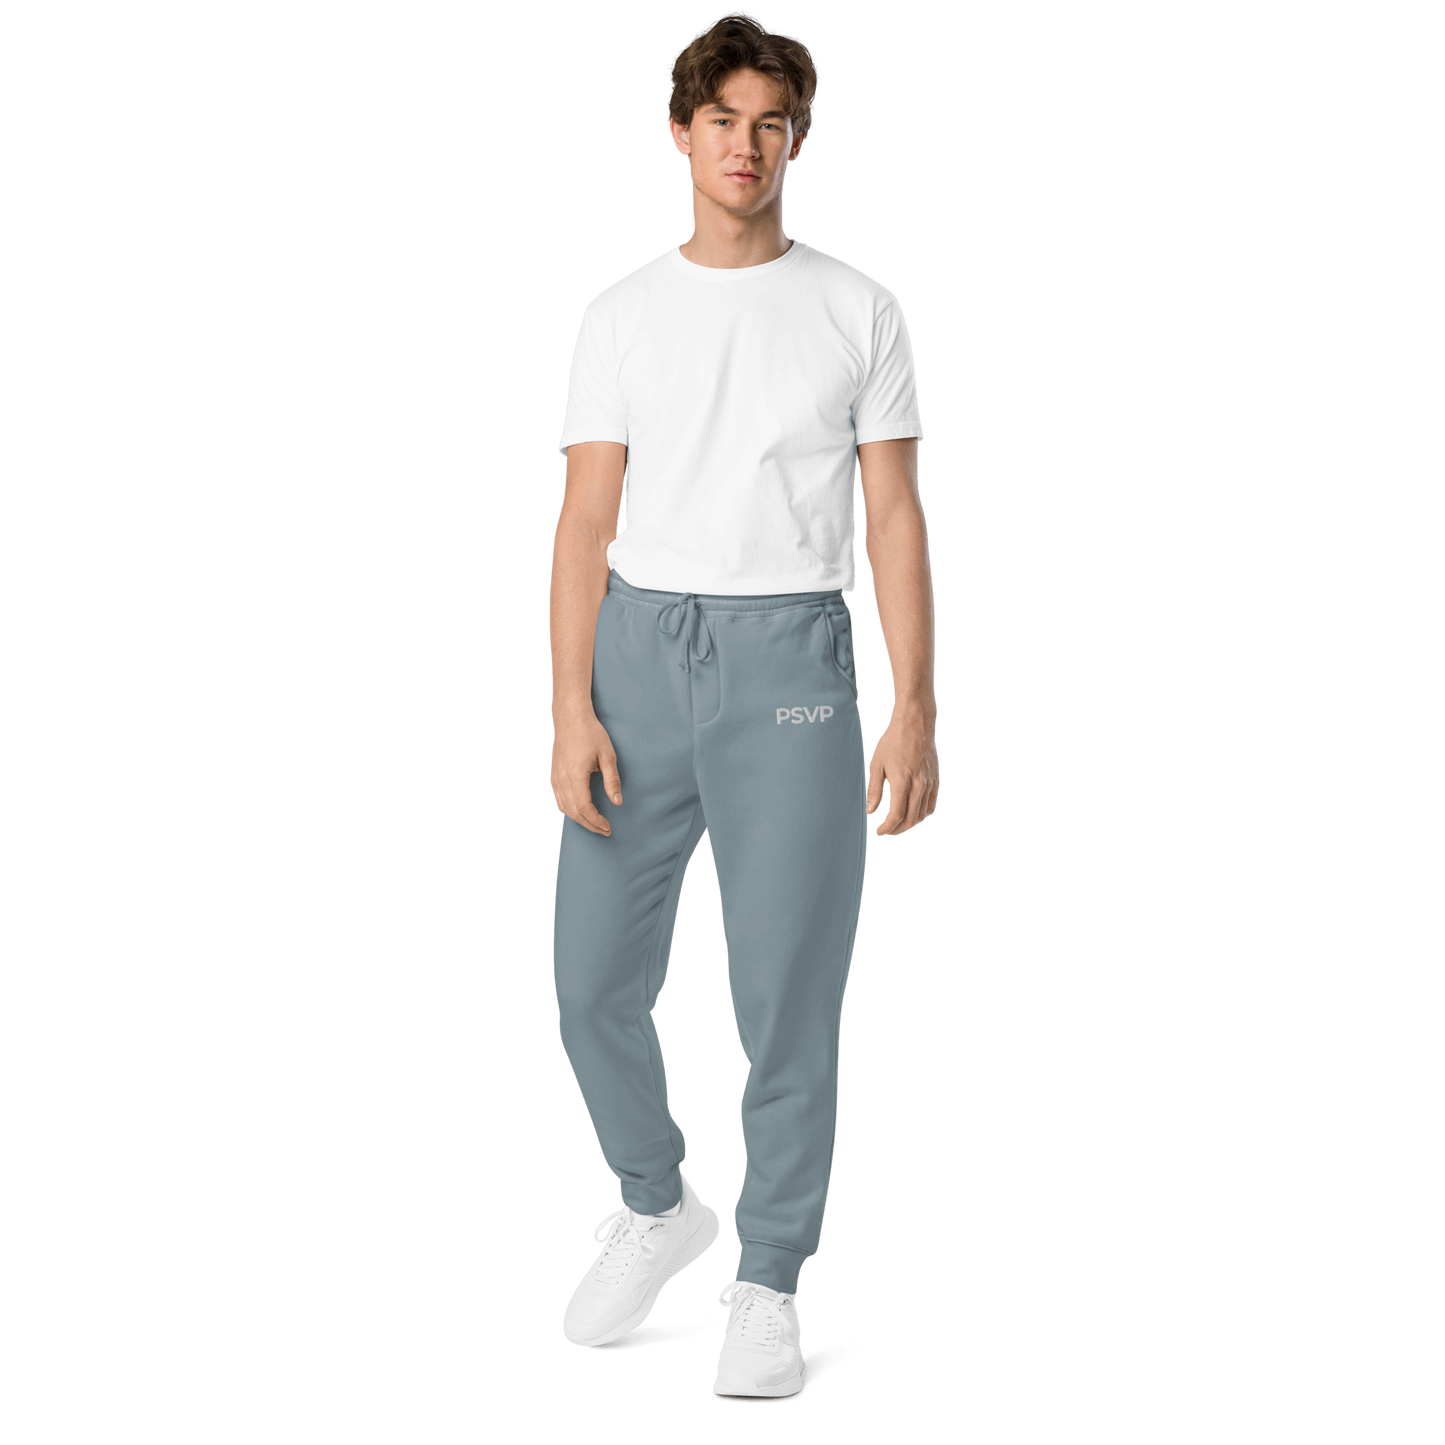 Load image into Gallery viewer, PSVP Pigment-Dyed Slate Blue Sweatpants - Embroidery | Sweatpants | PARADIS SVP
